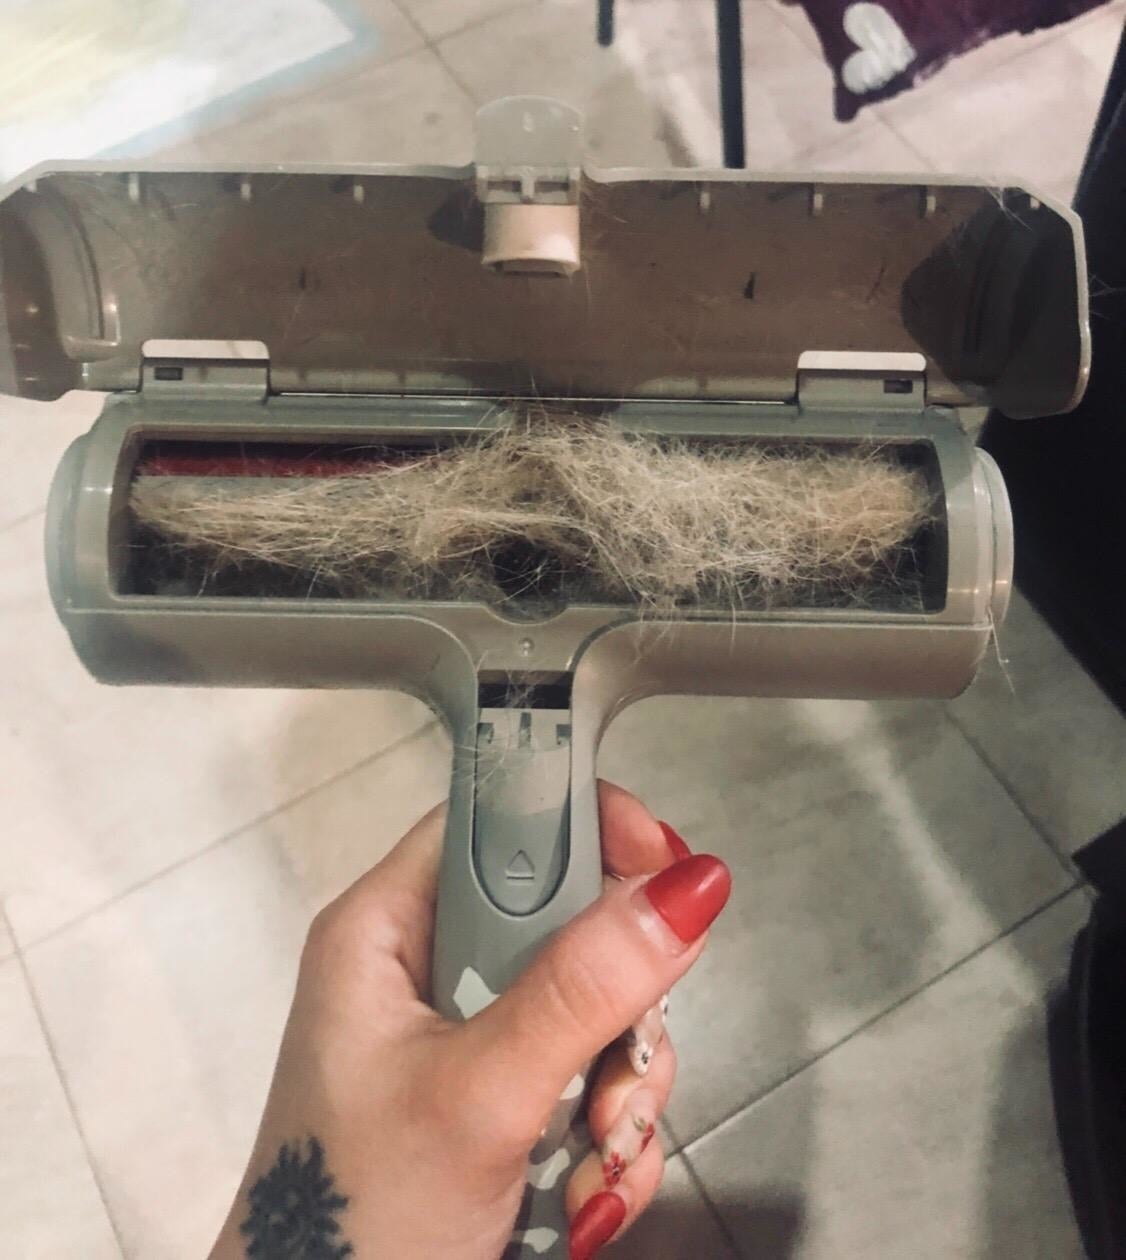 A person holding the pet hair roller